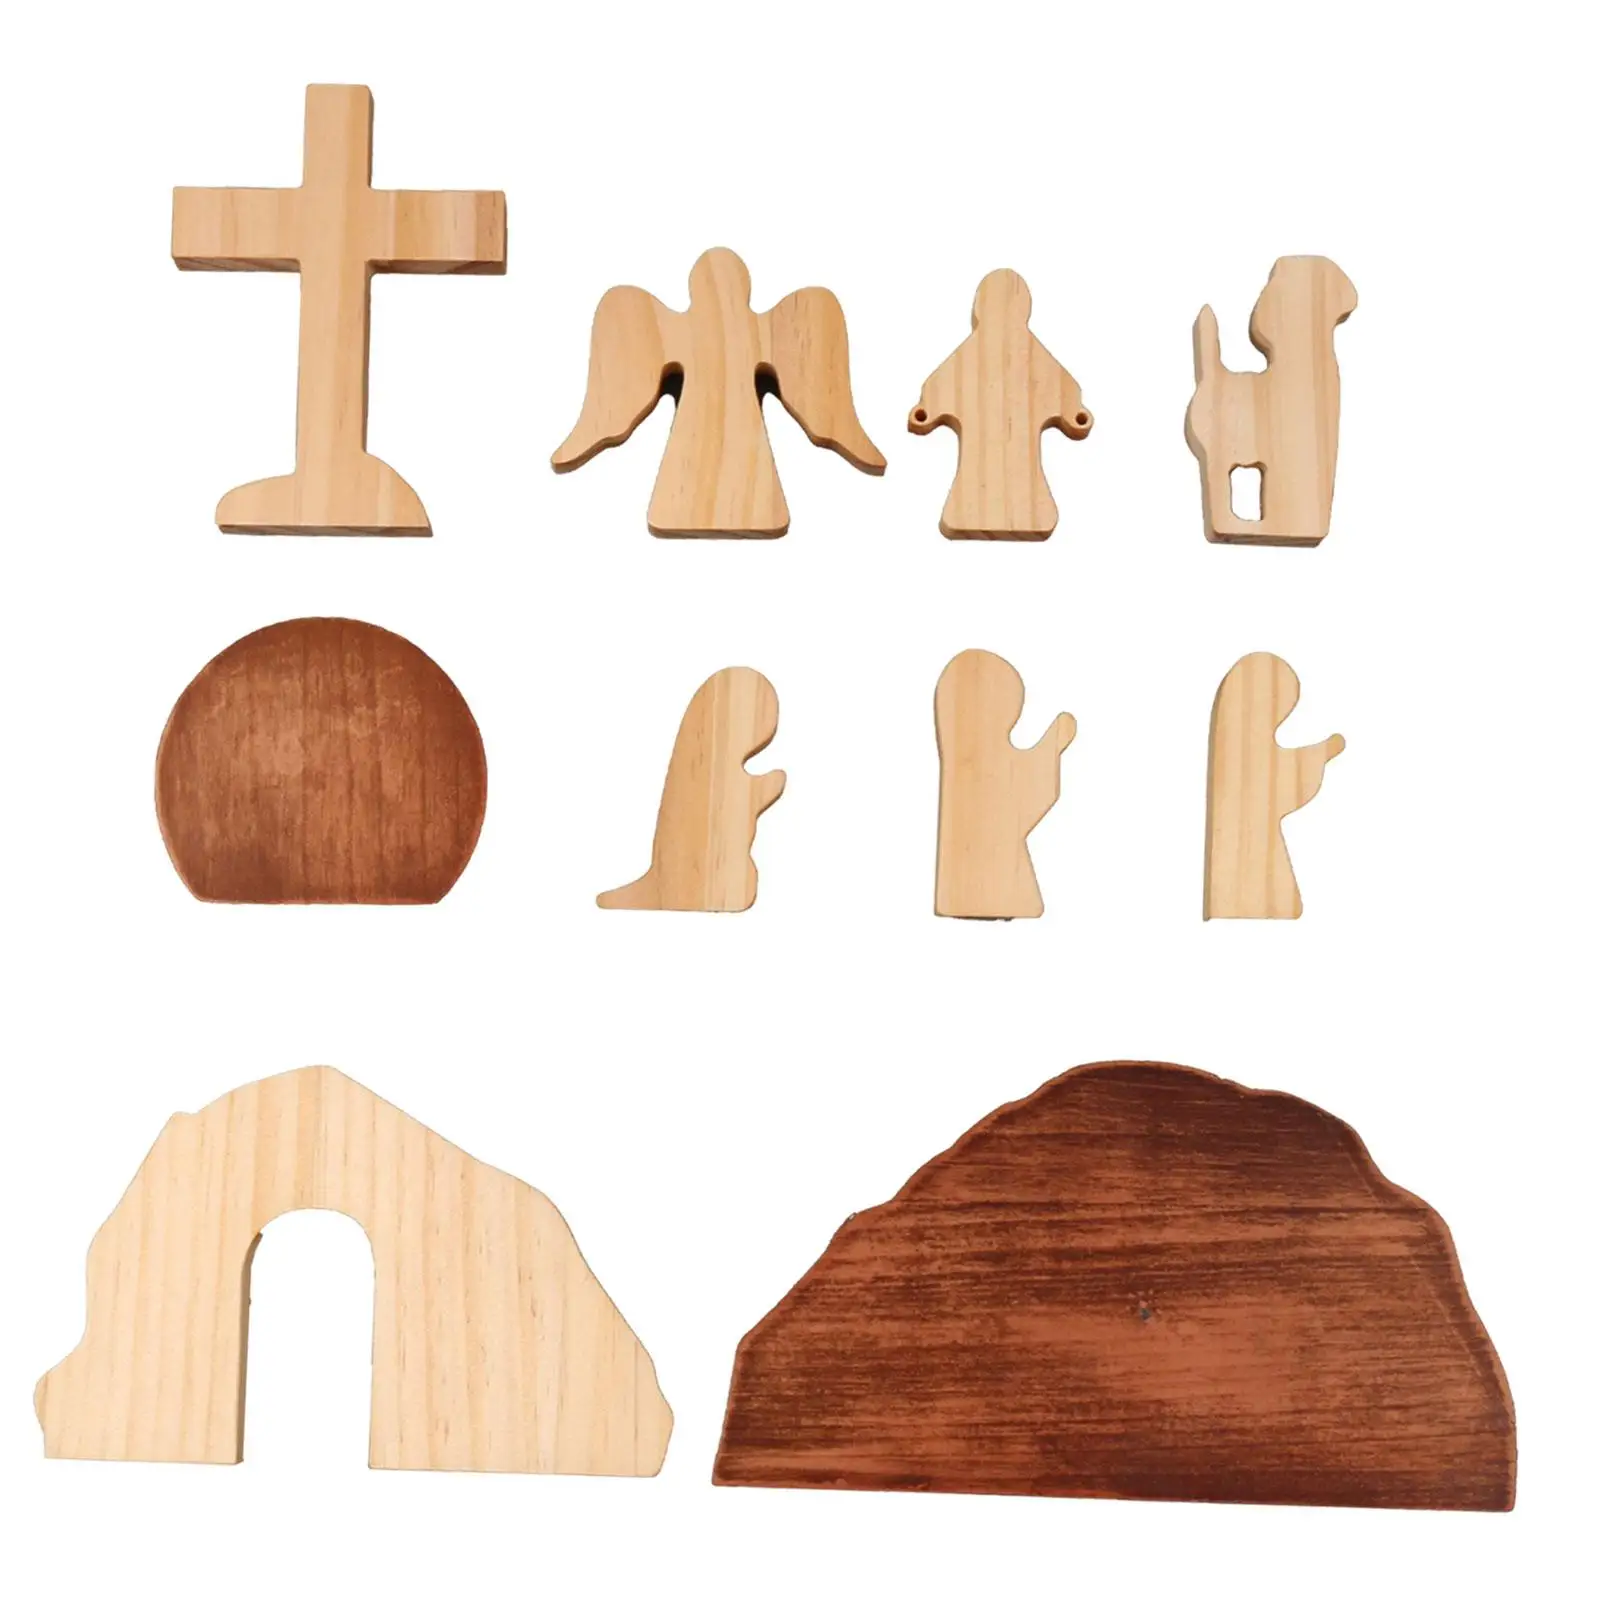 10 Pieces Easter Wooden Decorations Gifts Religious Home Decor Easter Resurrection Scene Set for Home Christian Table Office